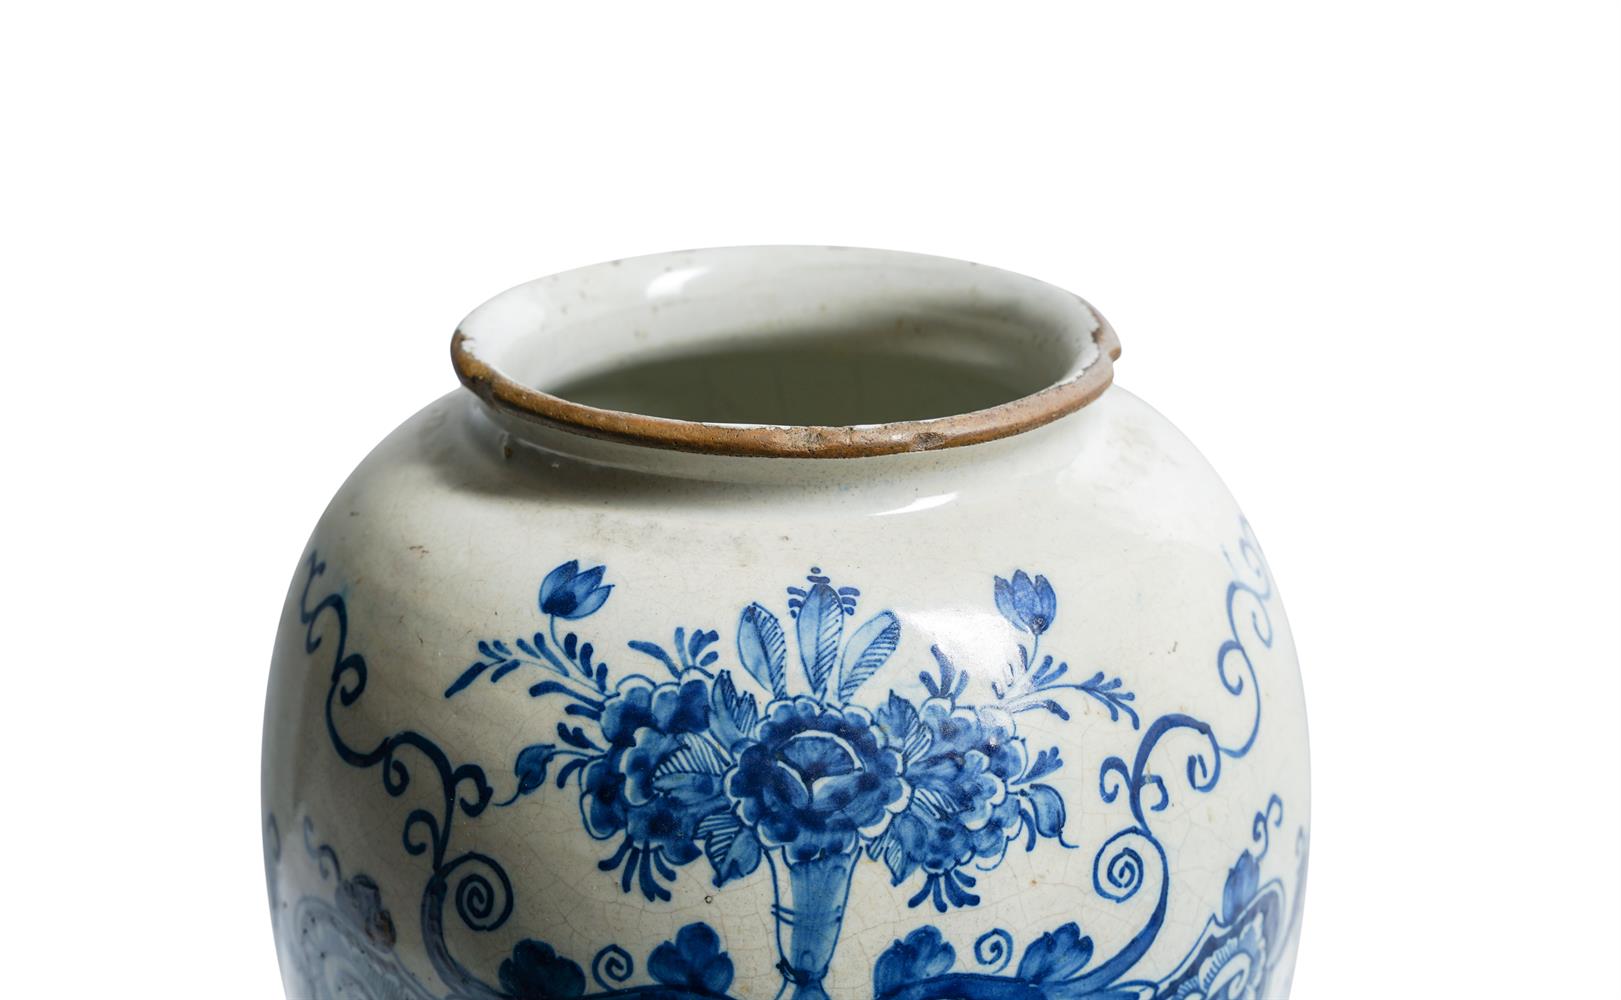 TWO SIMILAR DUTCH DELFT BLUE AND WHITE TOBACCO JARS AND ASSOCIATED BRASS COVERS - Image 4 of 7